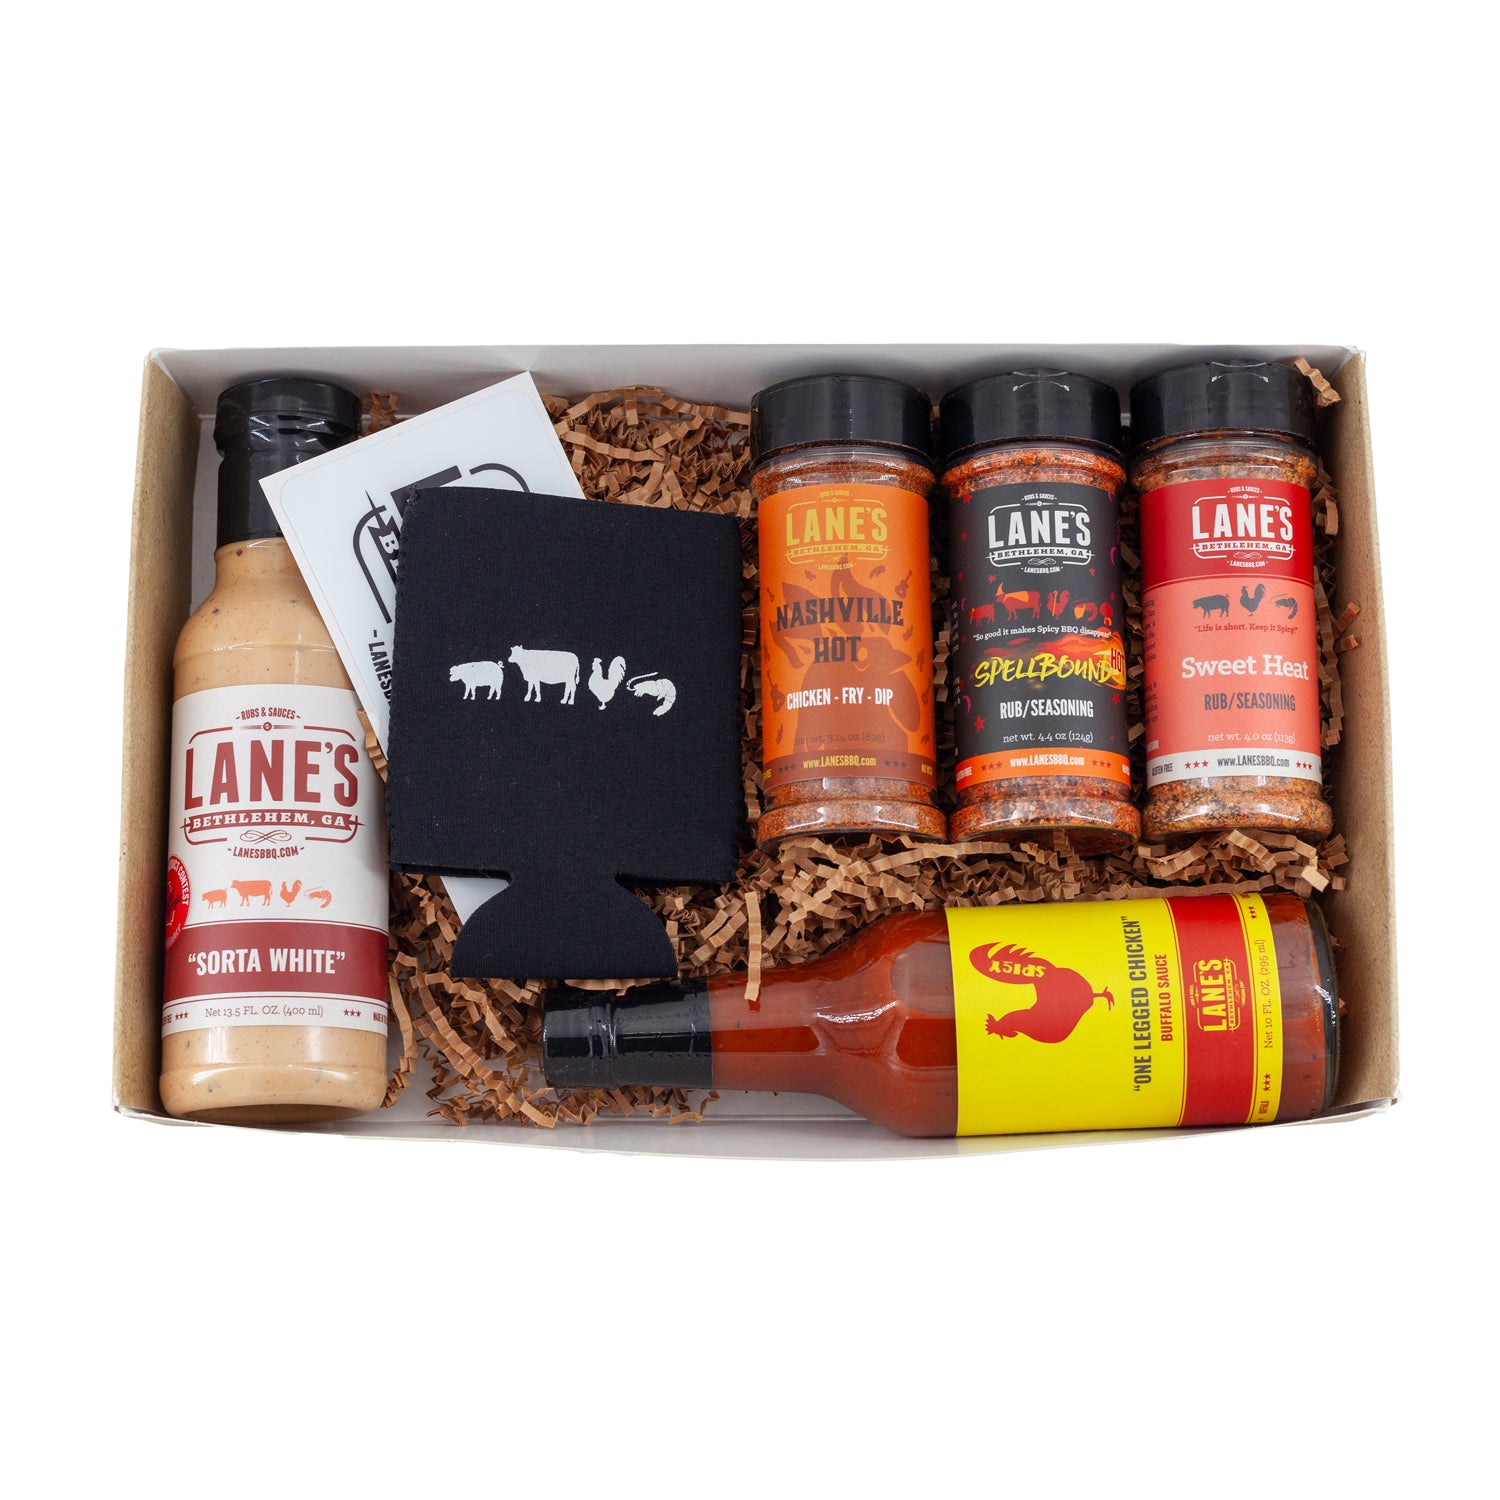 BBQ Rub and Spices Gift Set of 8 ~ Gift Set by High Plains Spice Company ~  Gourmet Meat and Veggie Spice Blends & Rubs For Beef, Chicken, Veggies 